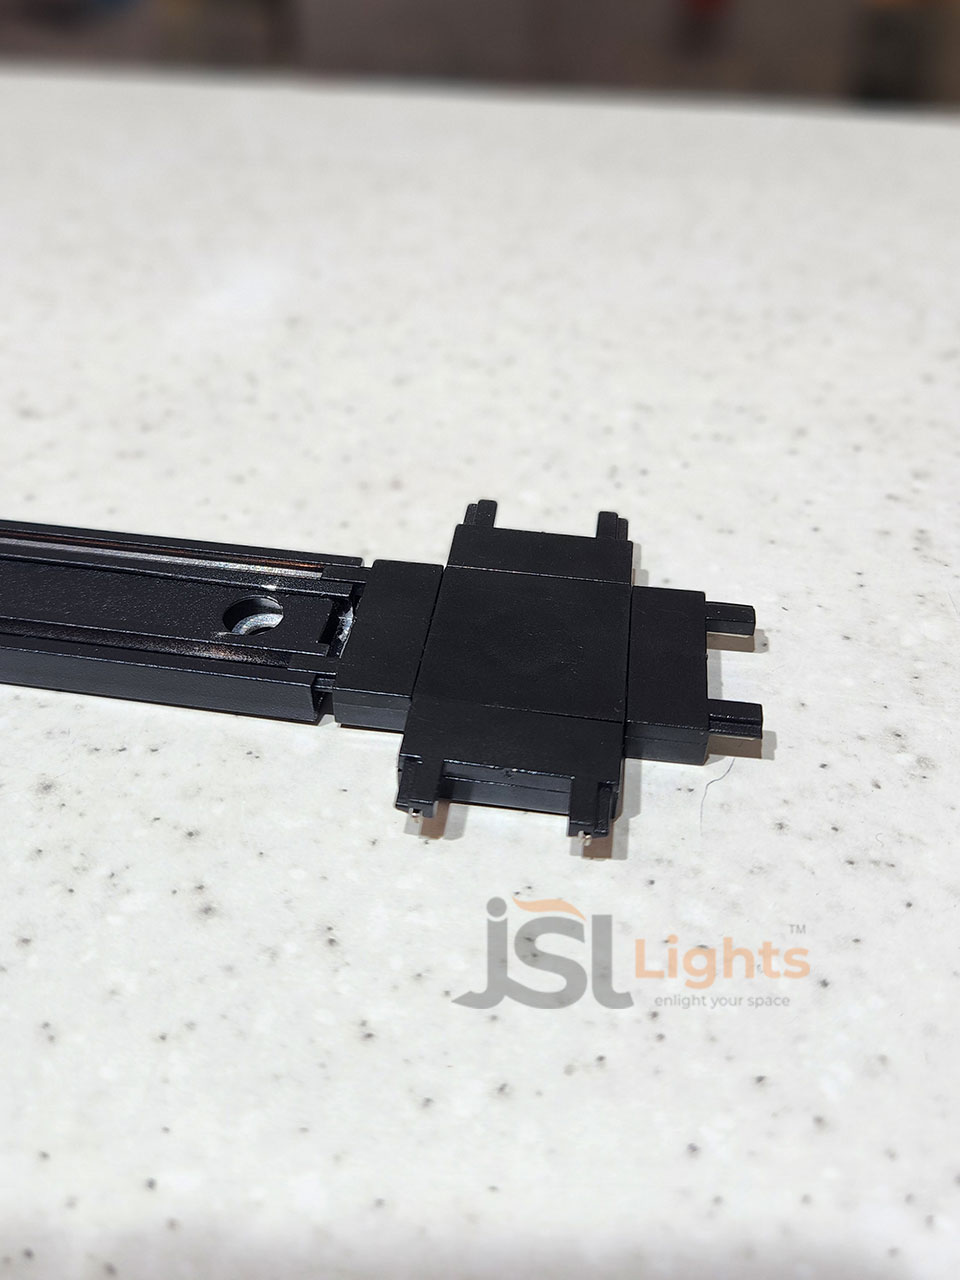 Slim Cross Magnetic Track Jointer MG TR01-5 Horizontal Surface MG 4 Way Jointer Connector for Ultra Thin Magnetic Track